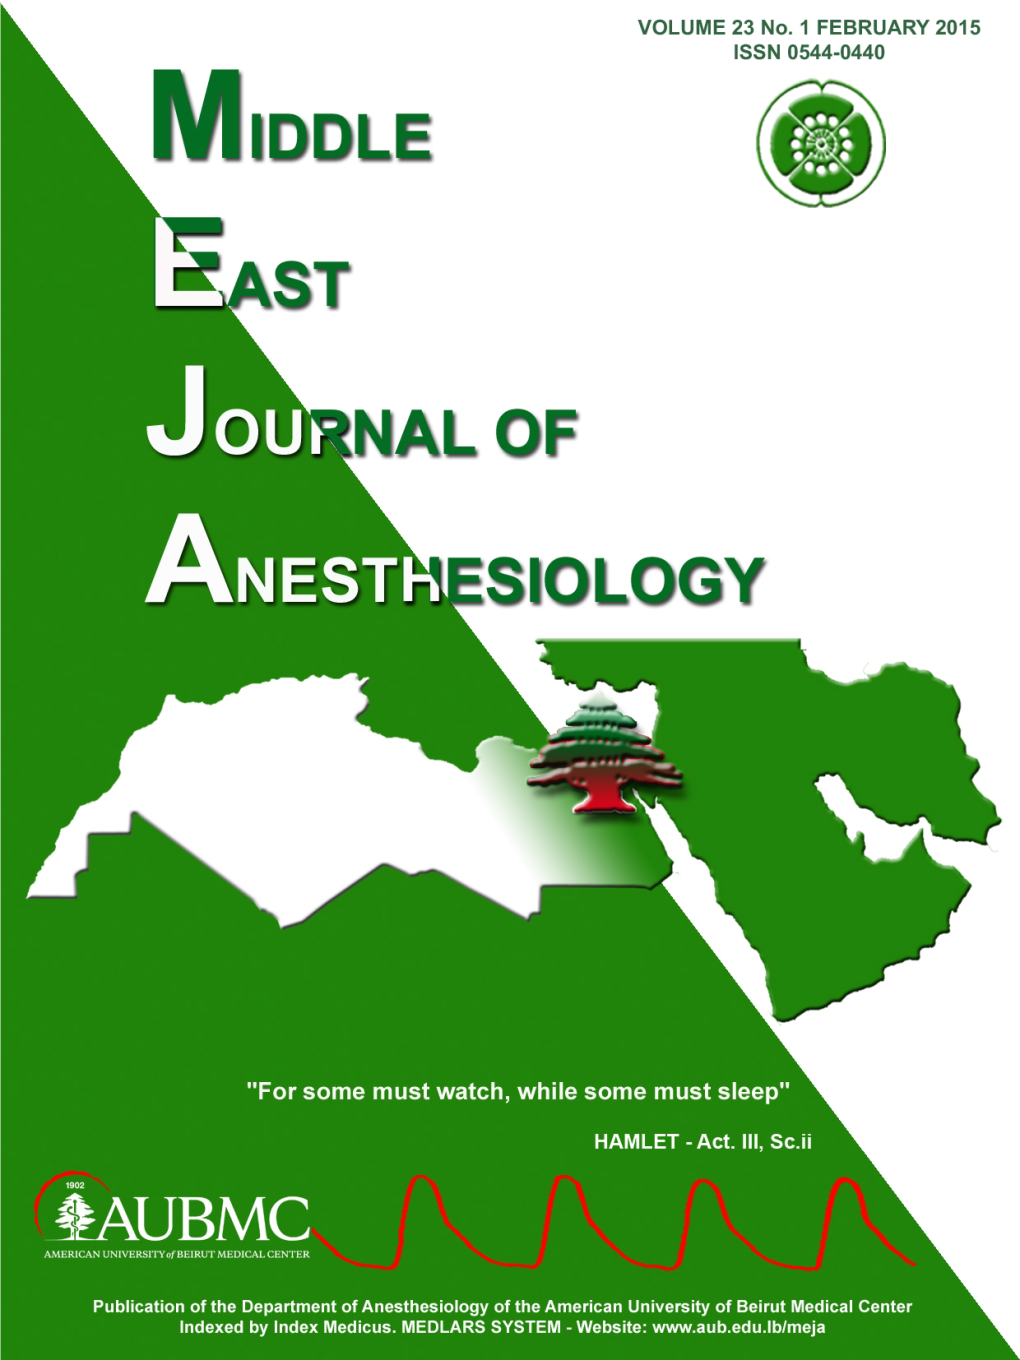 MIDDLE EAST JOURNAL of ANESTHESIOLOGY Department of Anesthesiology American University of Beirut Medical Center P.O